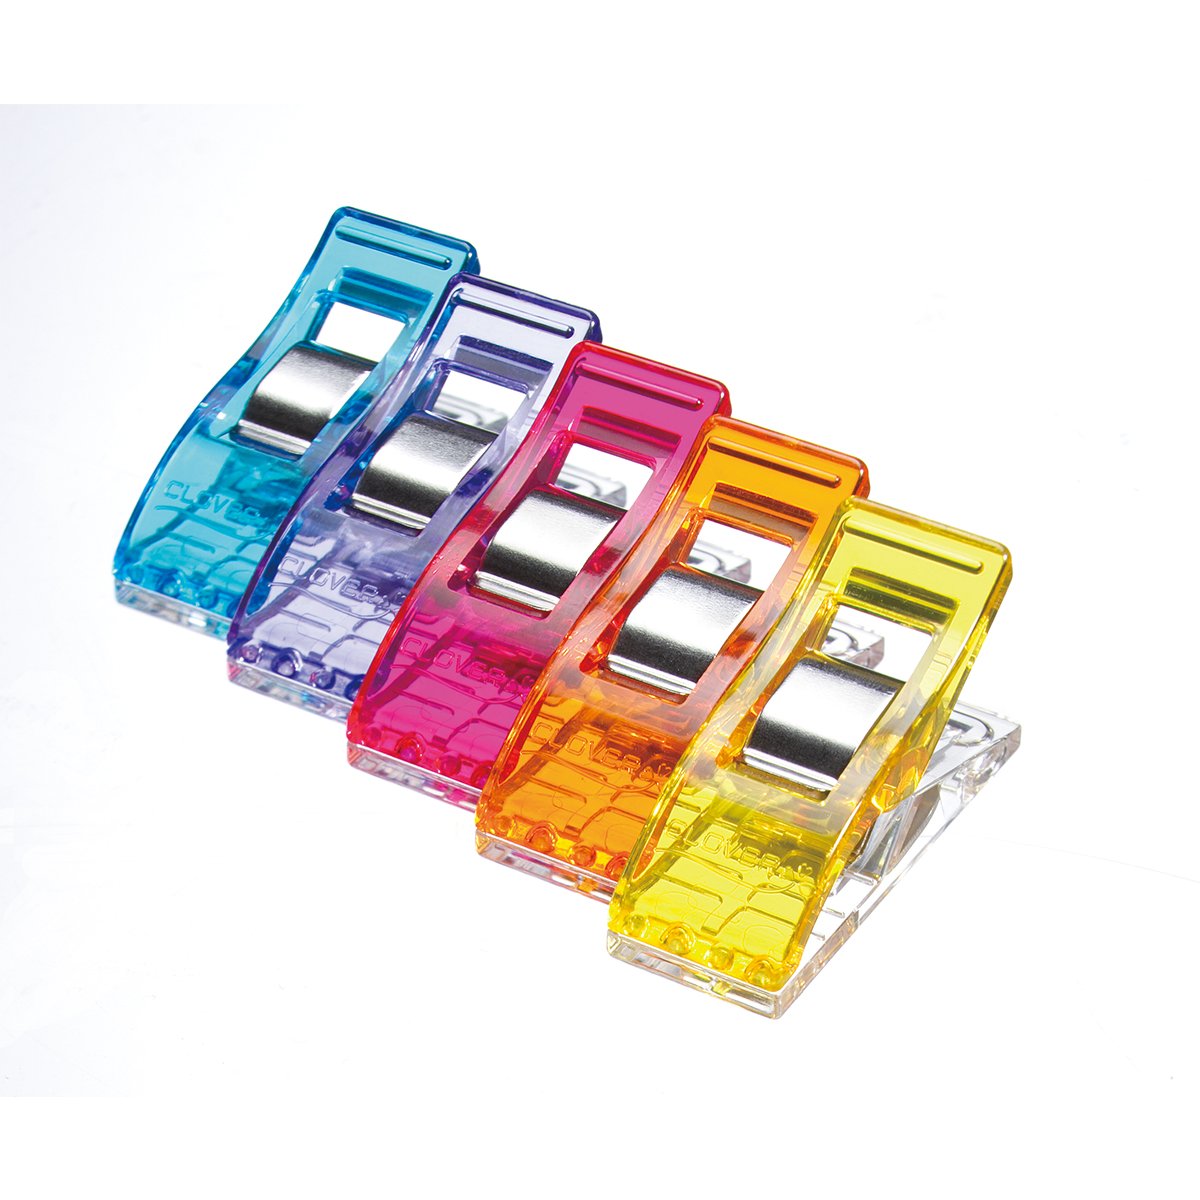 Wonder Clips - Set of 10 - Assorted Colors from Clover